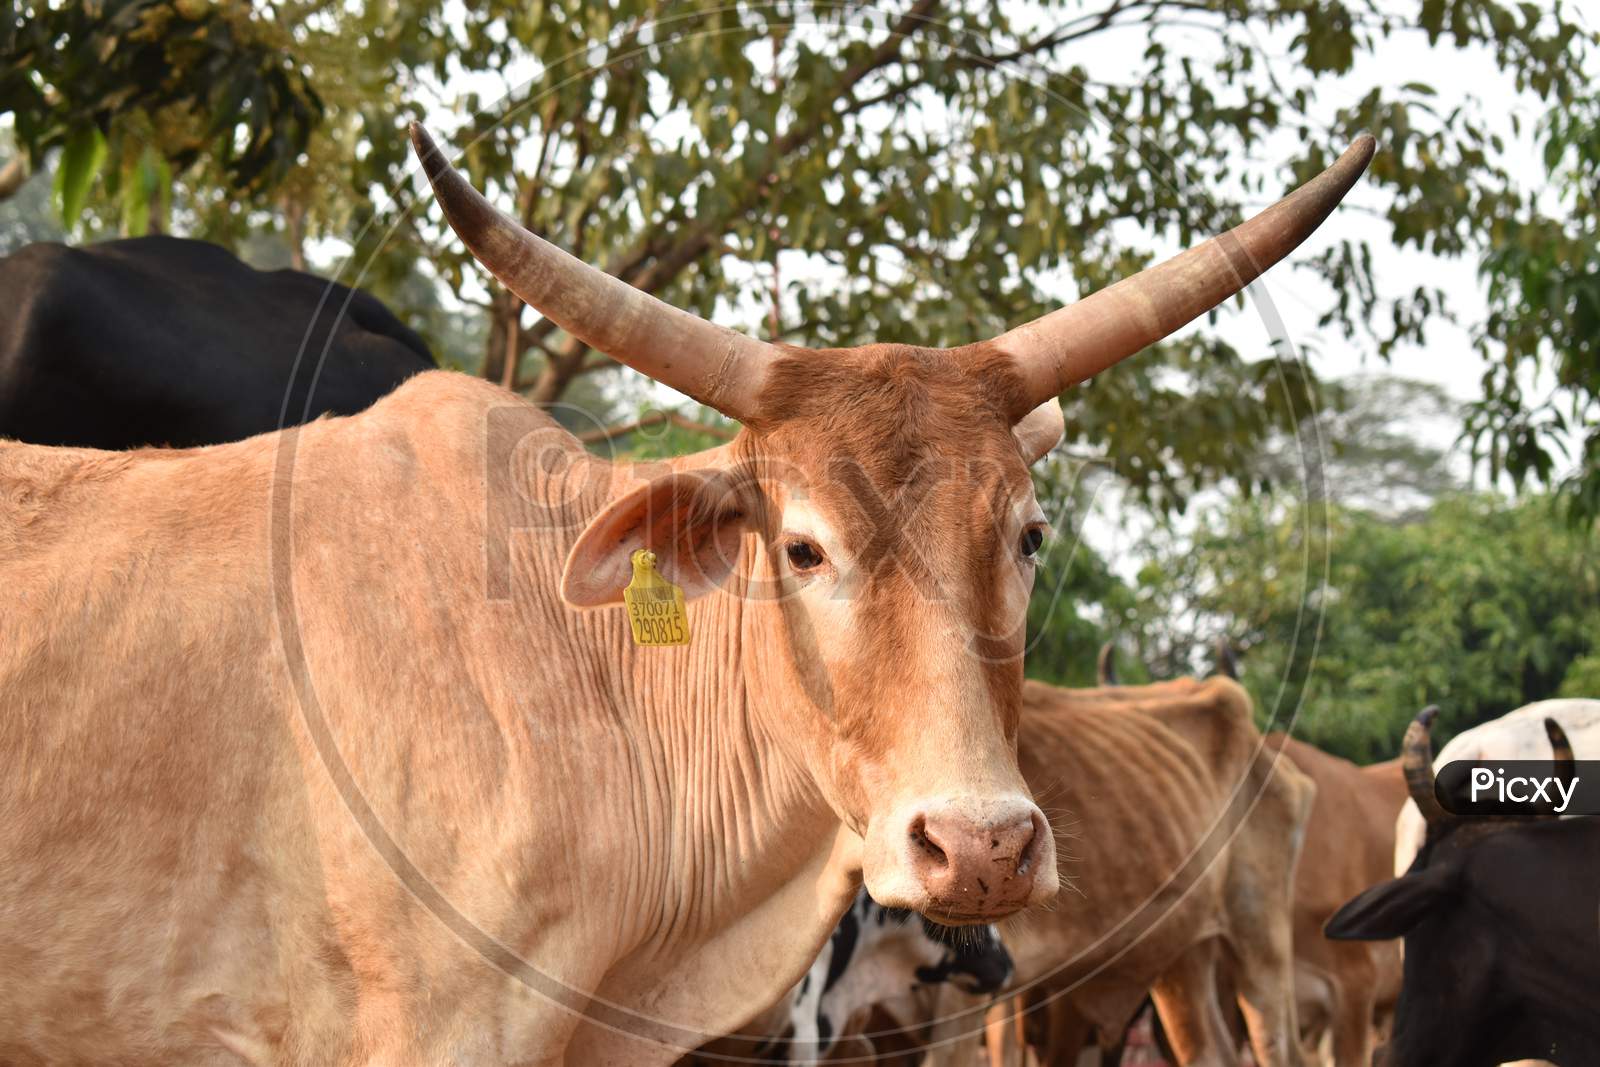 Indian Brown Cow With Big Horns And Ear Tag On Left Ear Looking Straight In Camera